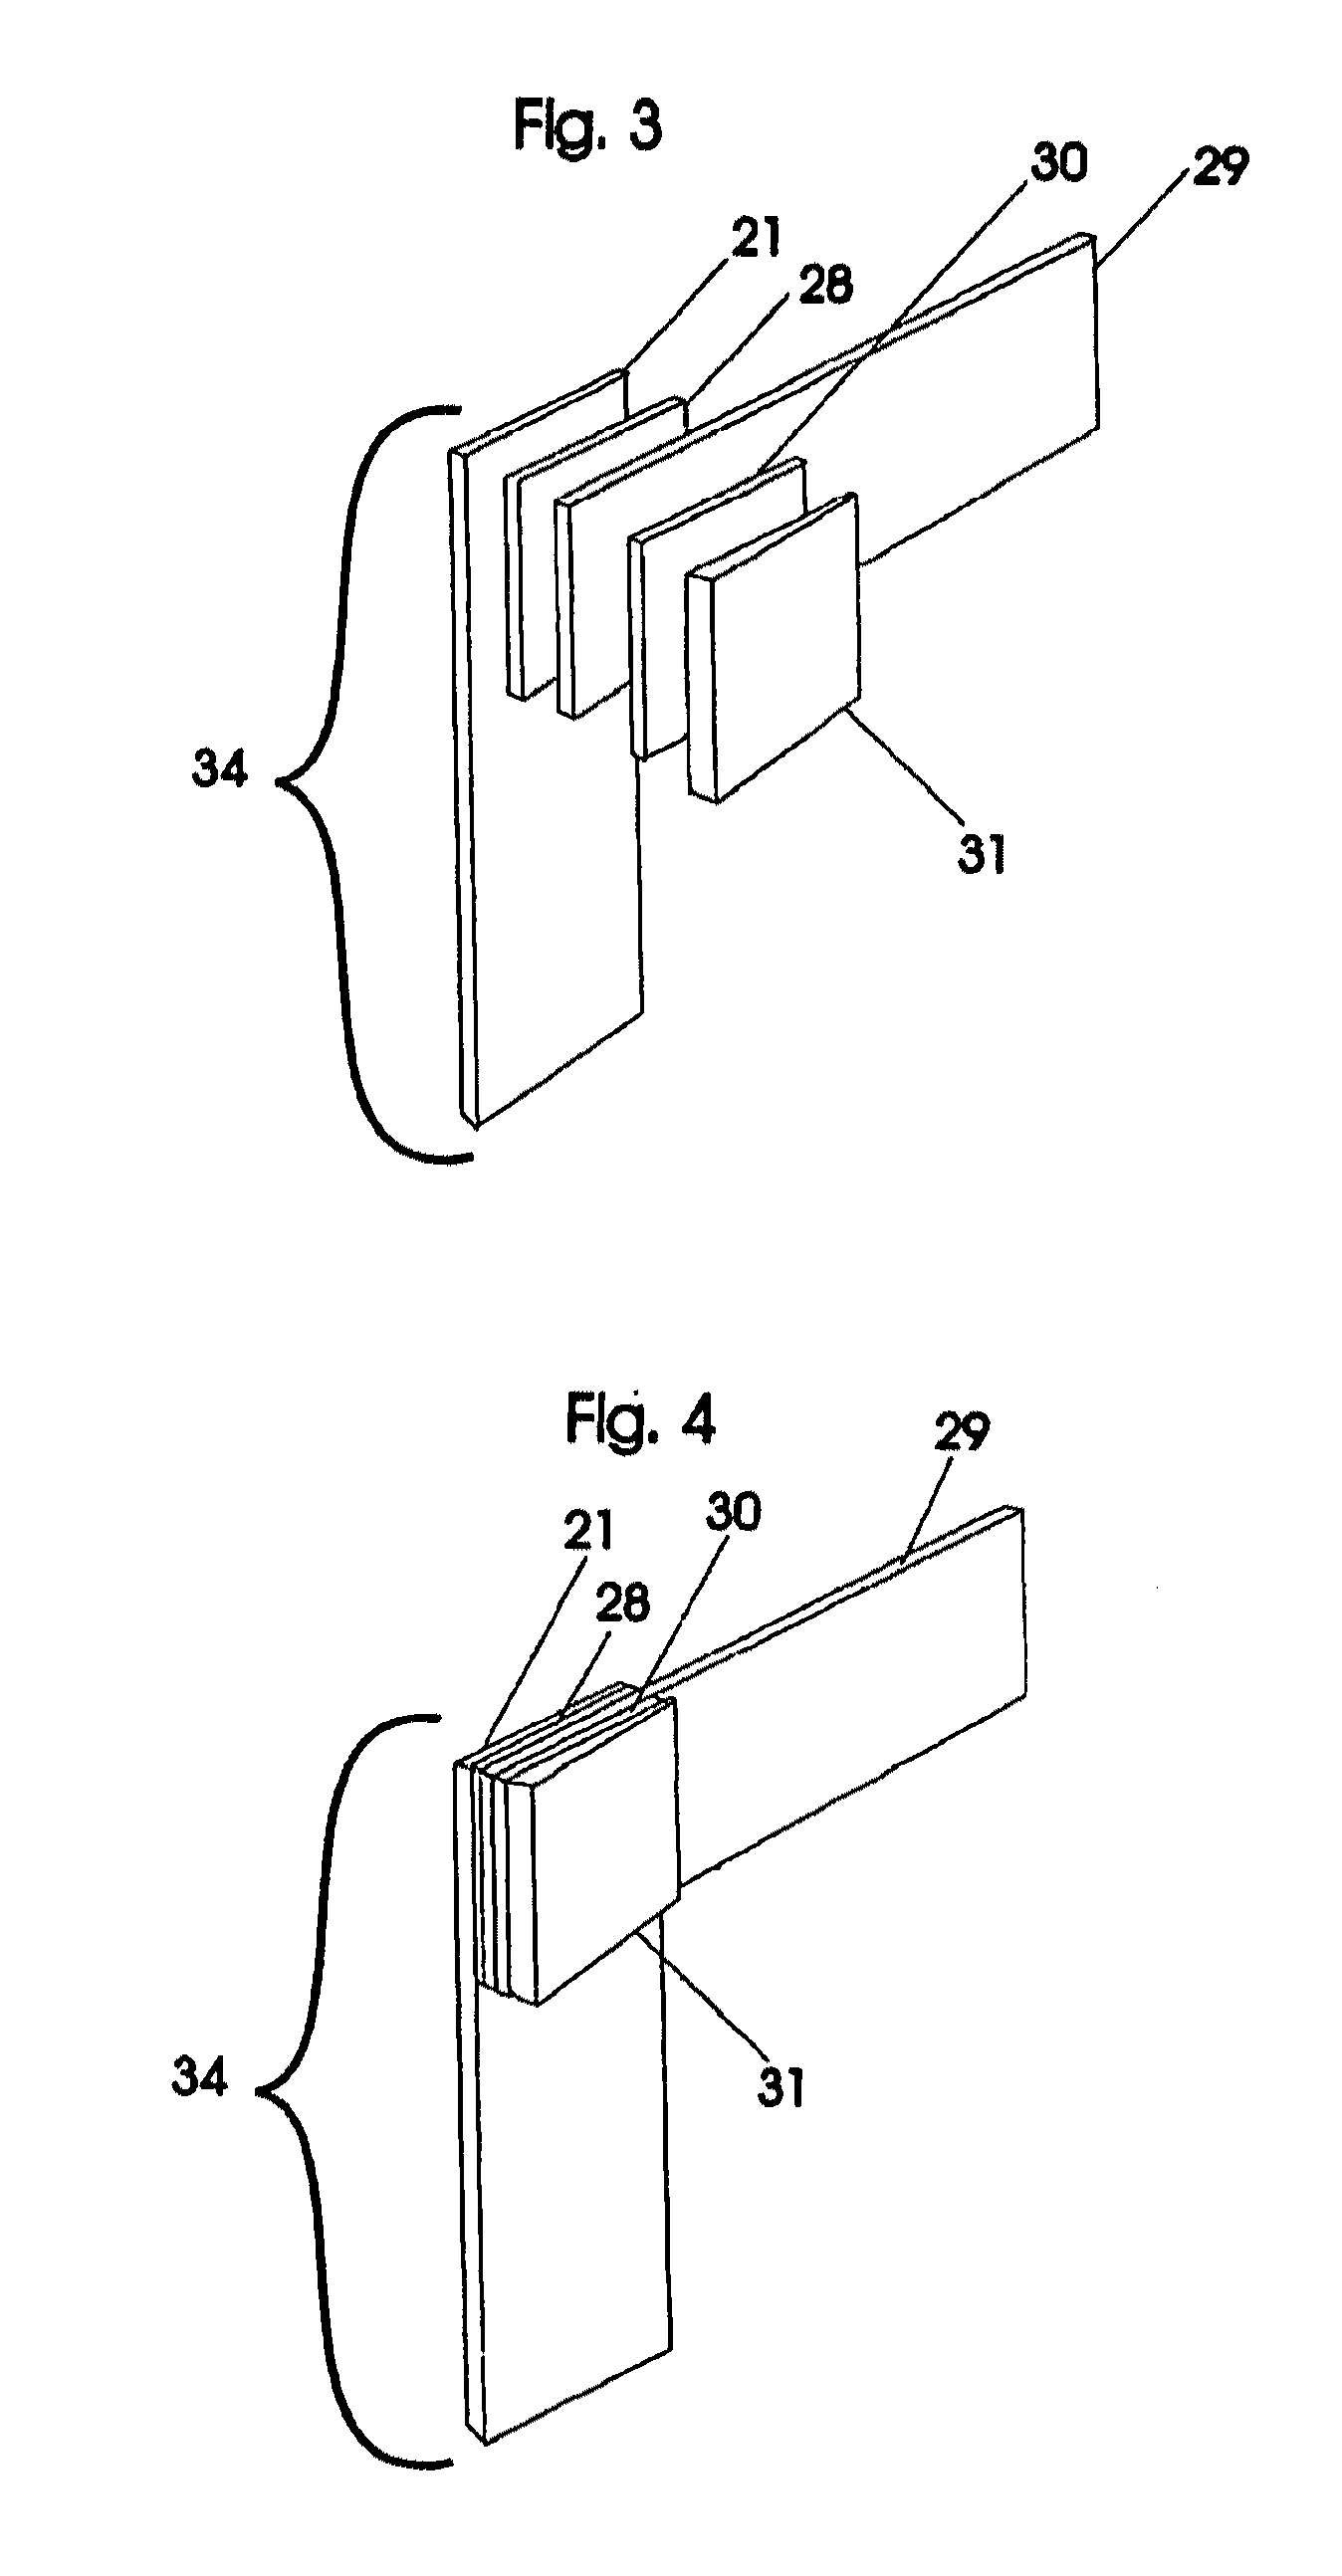 Solid state thermoelectric power converter